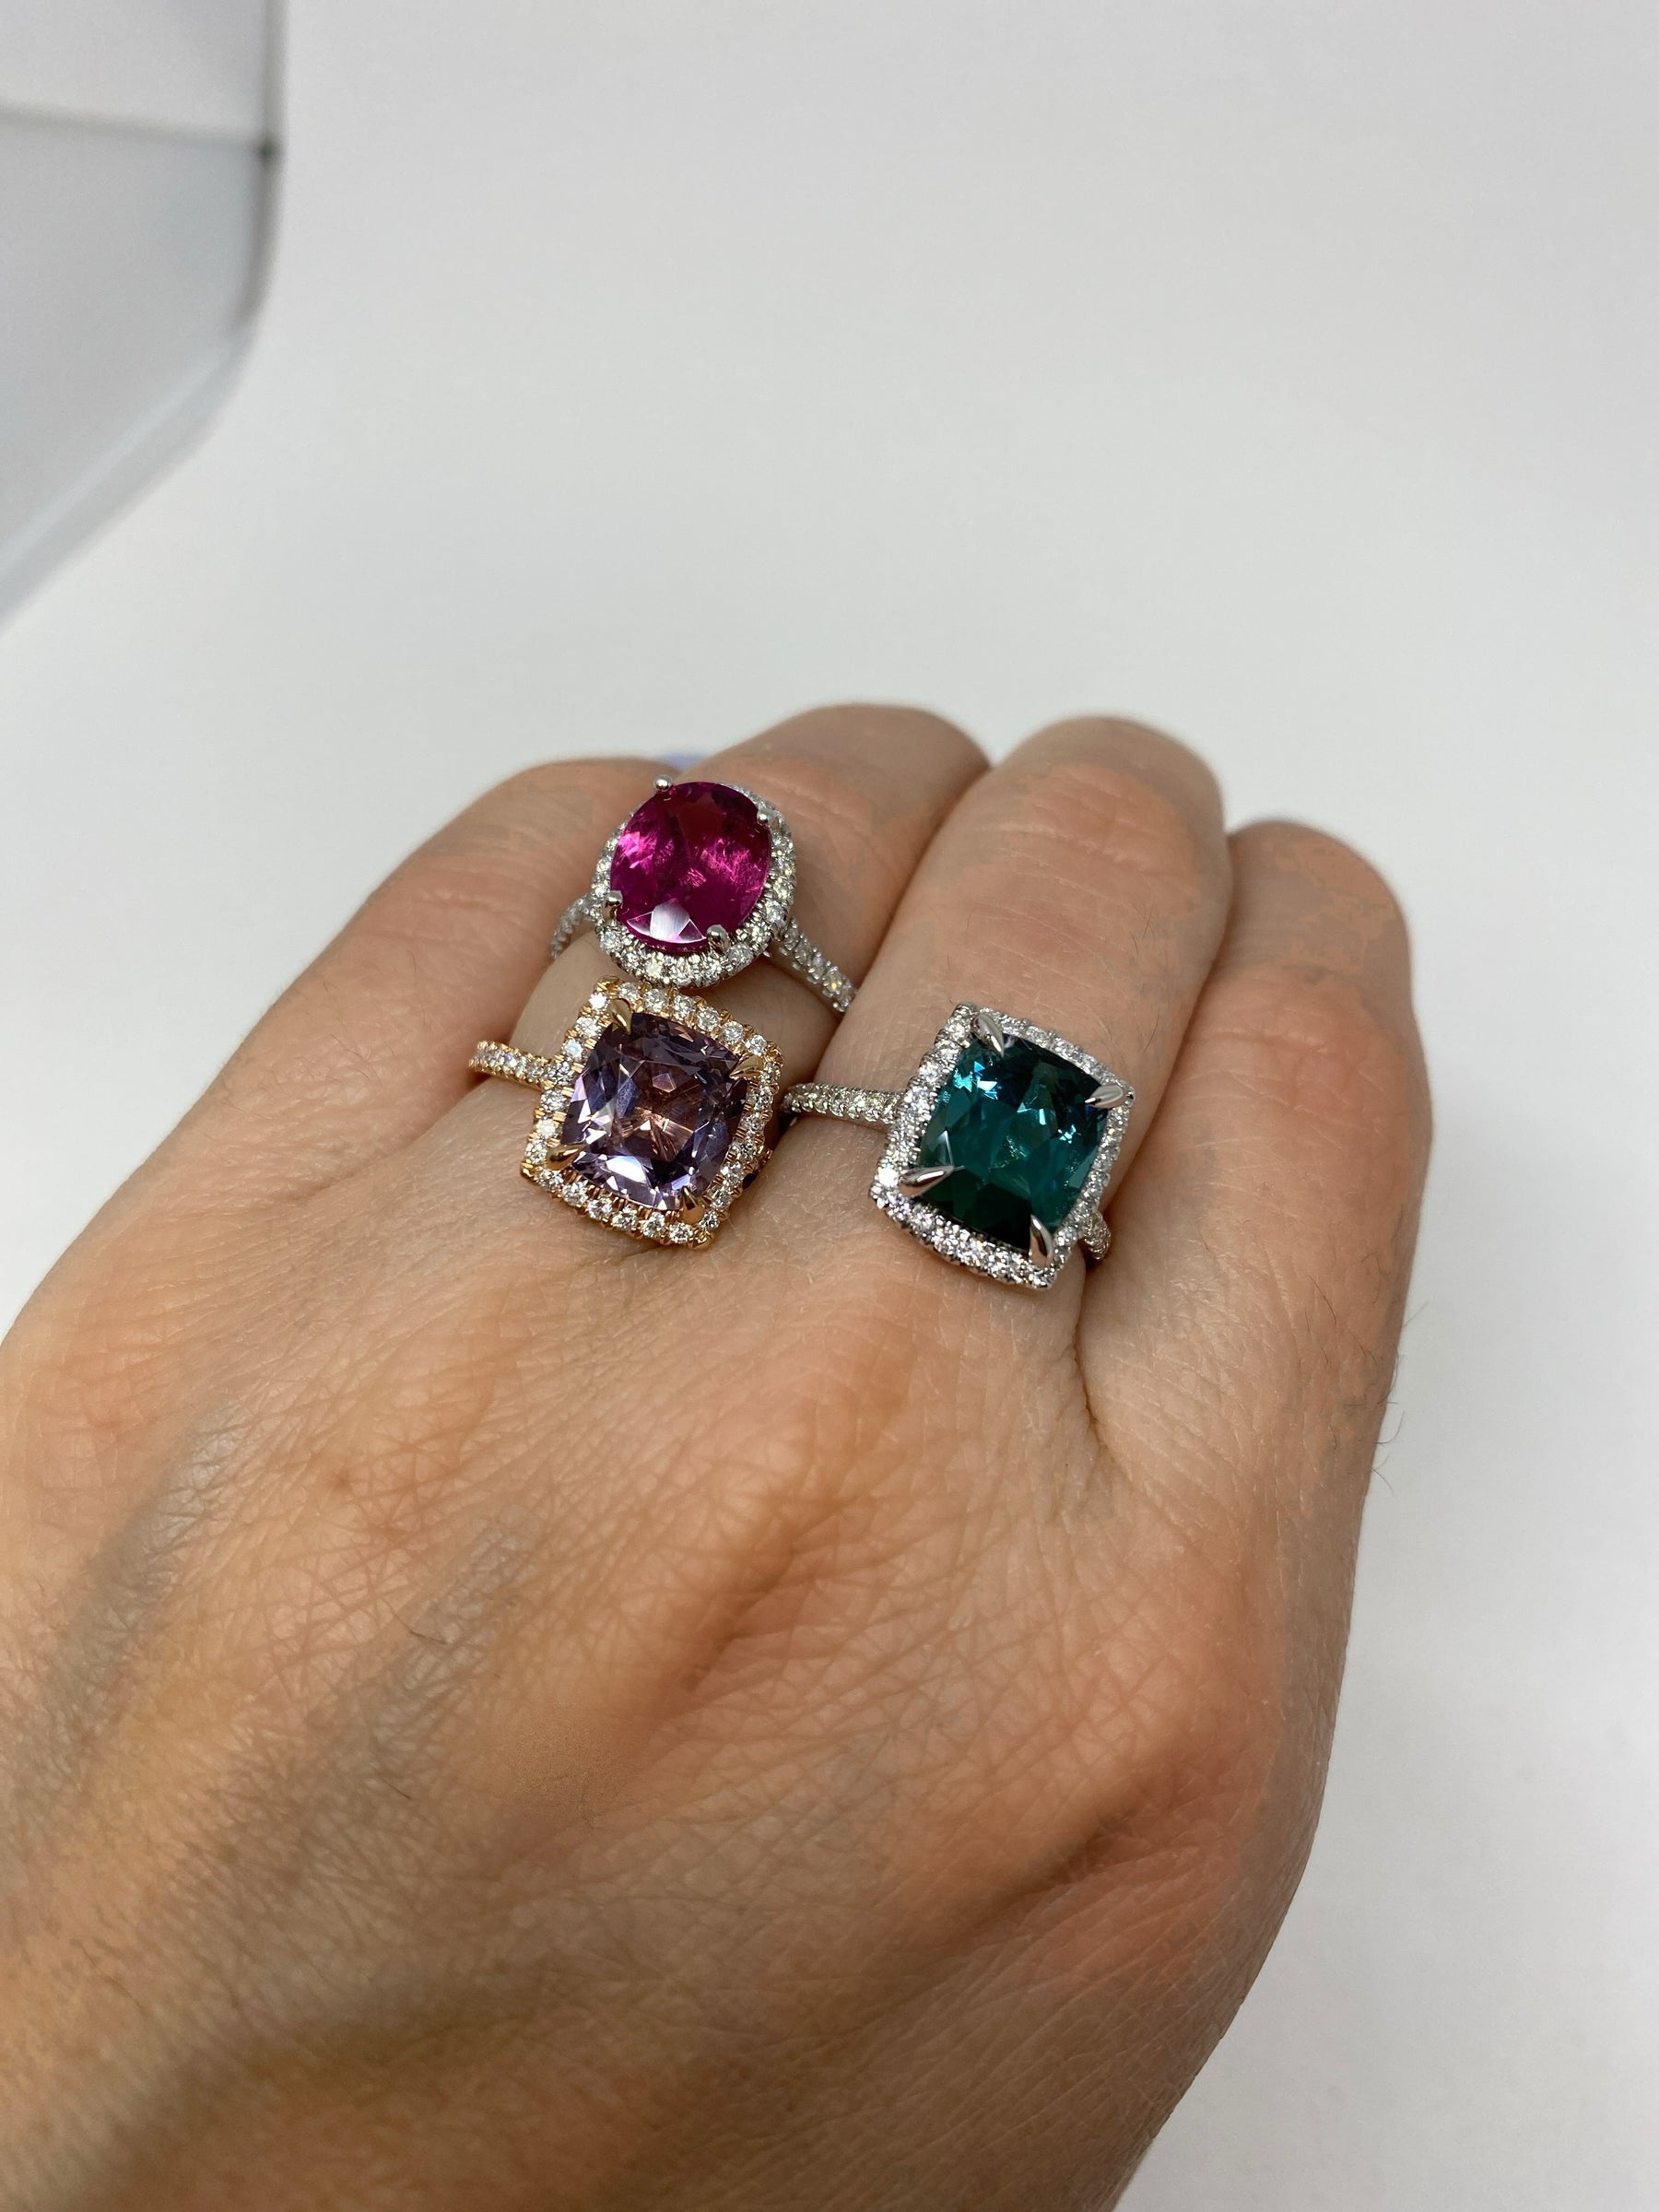 18K Rose Gold Diamond Halo 3ct Lavender Spinel Ring styled with tourmaline halo rings on model